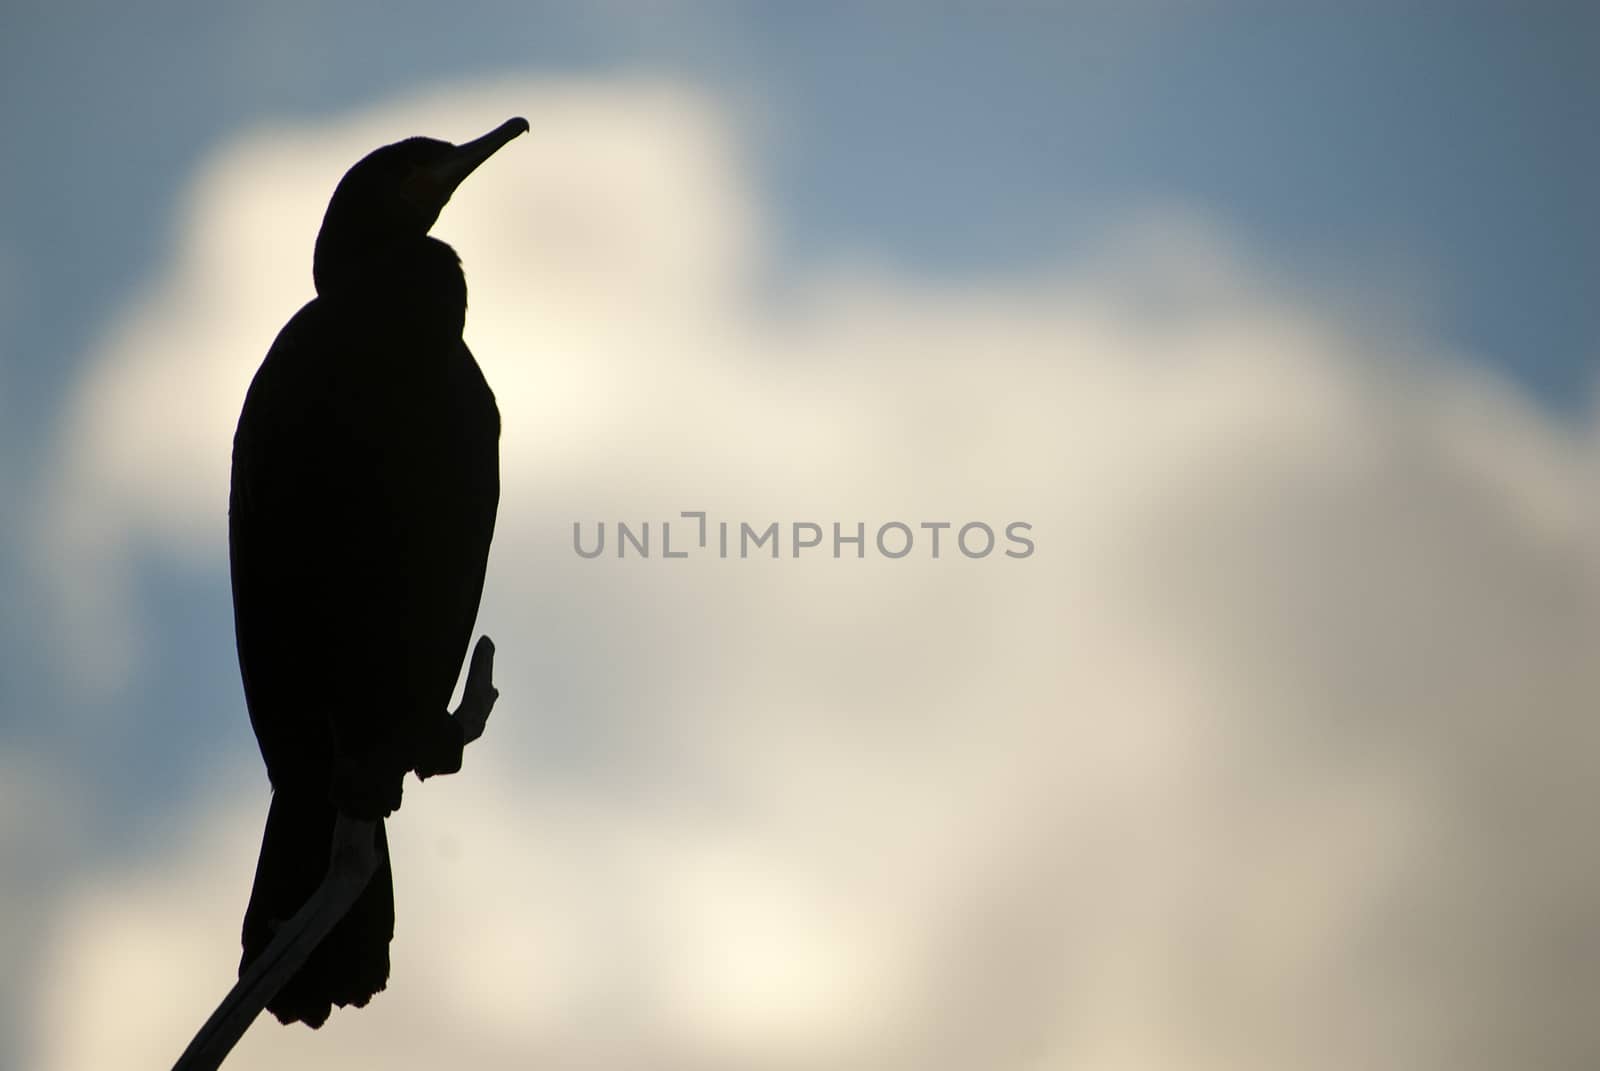 Great Cormorant -  Phalacrocorax carbo on a branch against the light against the sunset sky, , bird